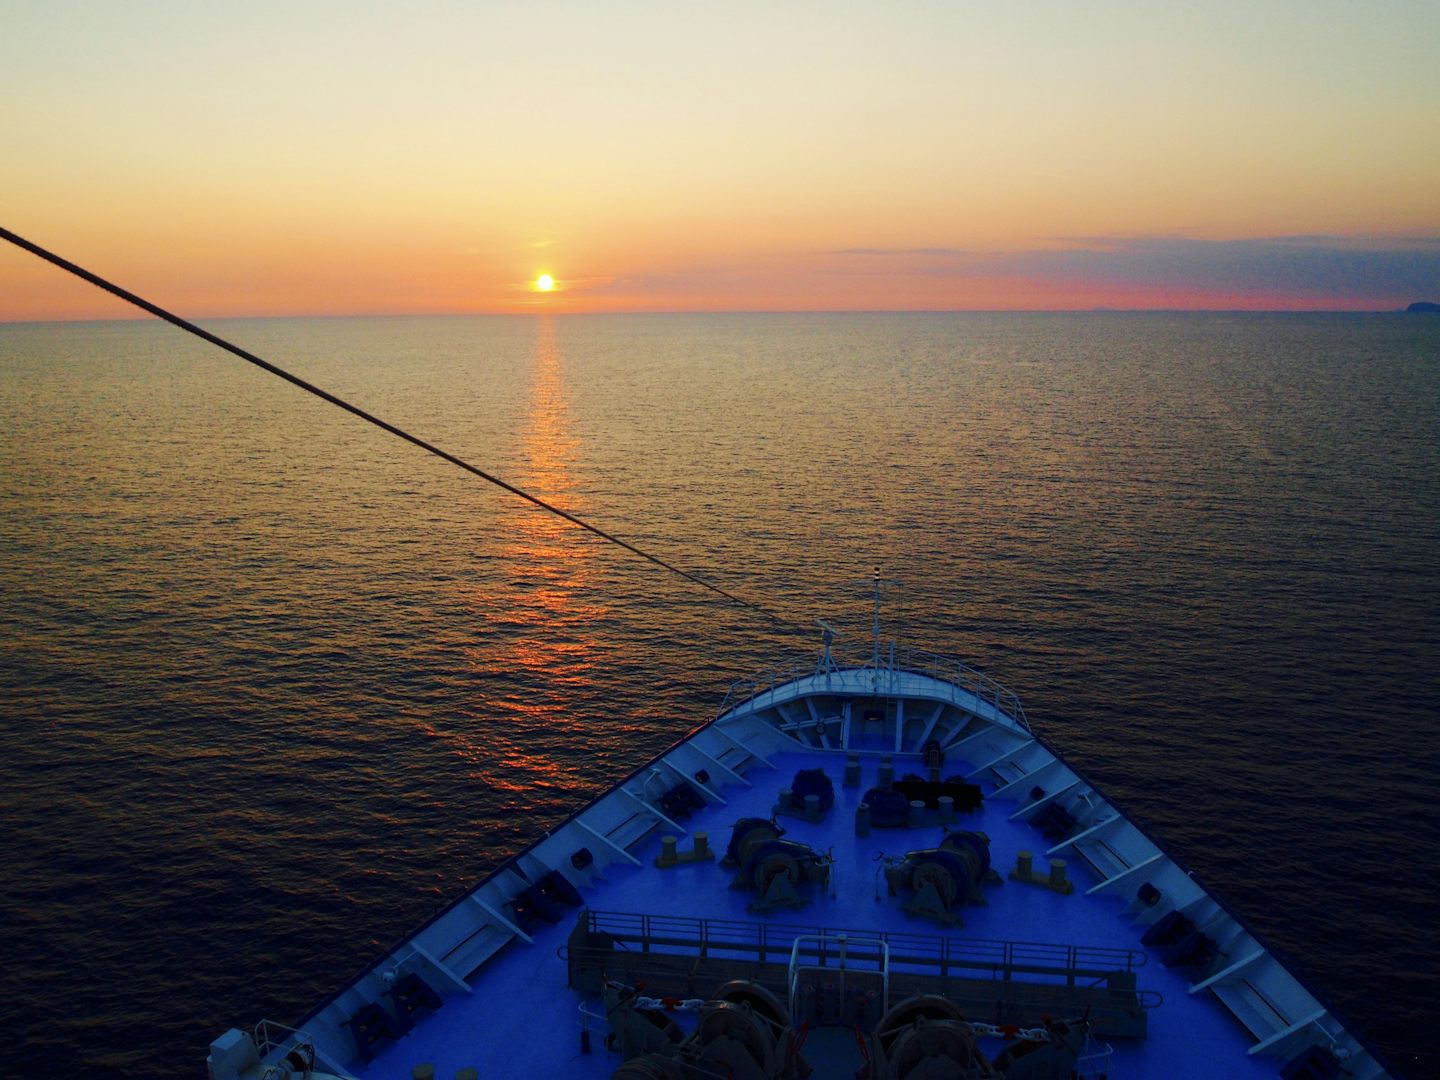 Sunset beyond the bow of TUI Discovery.